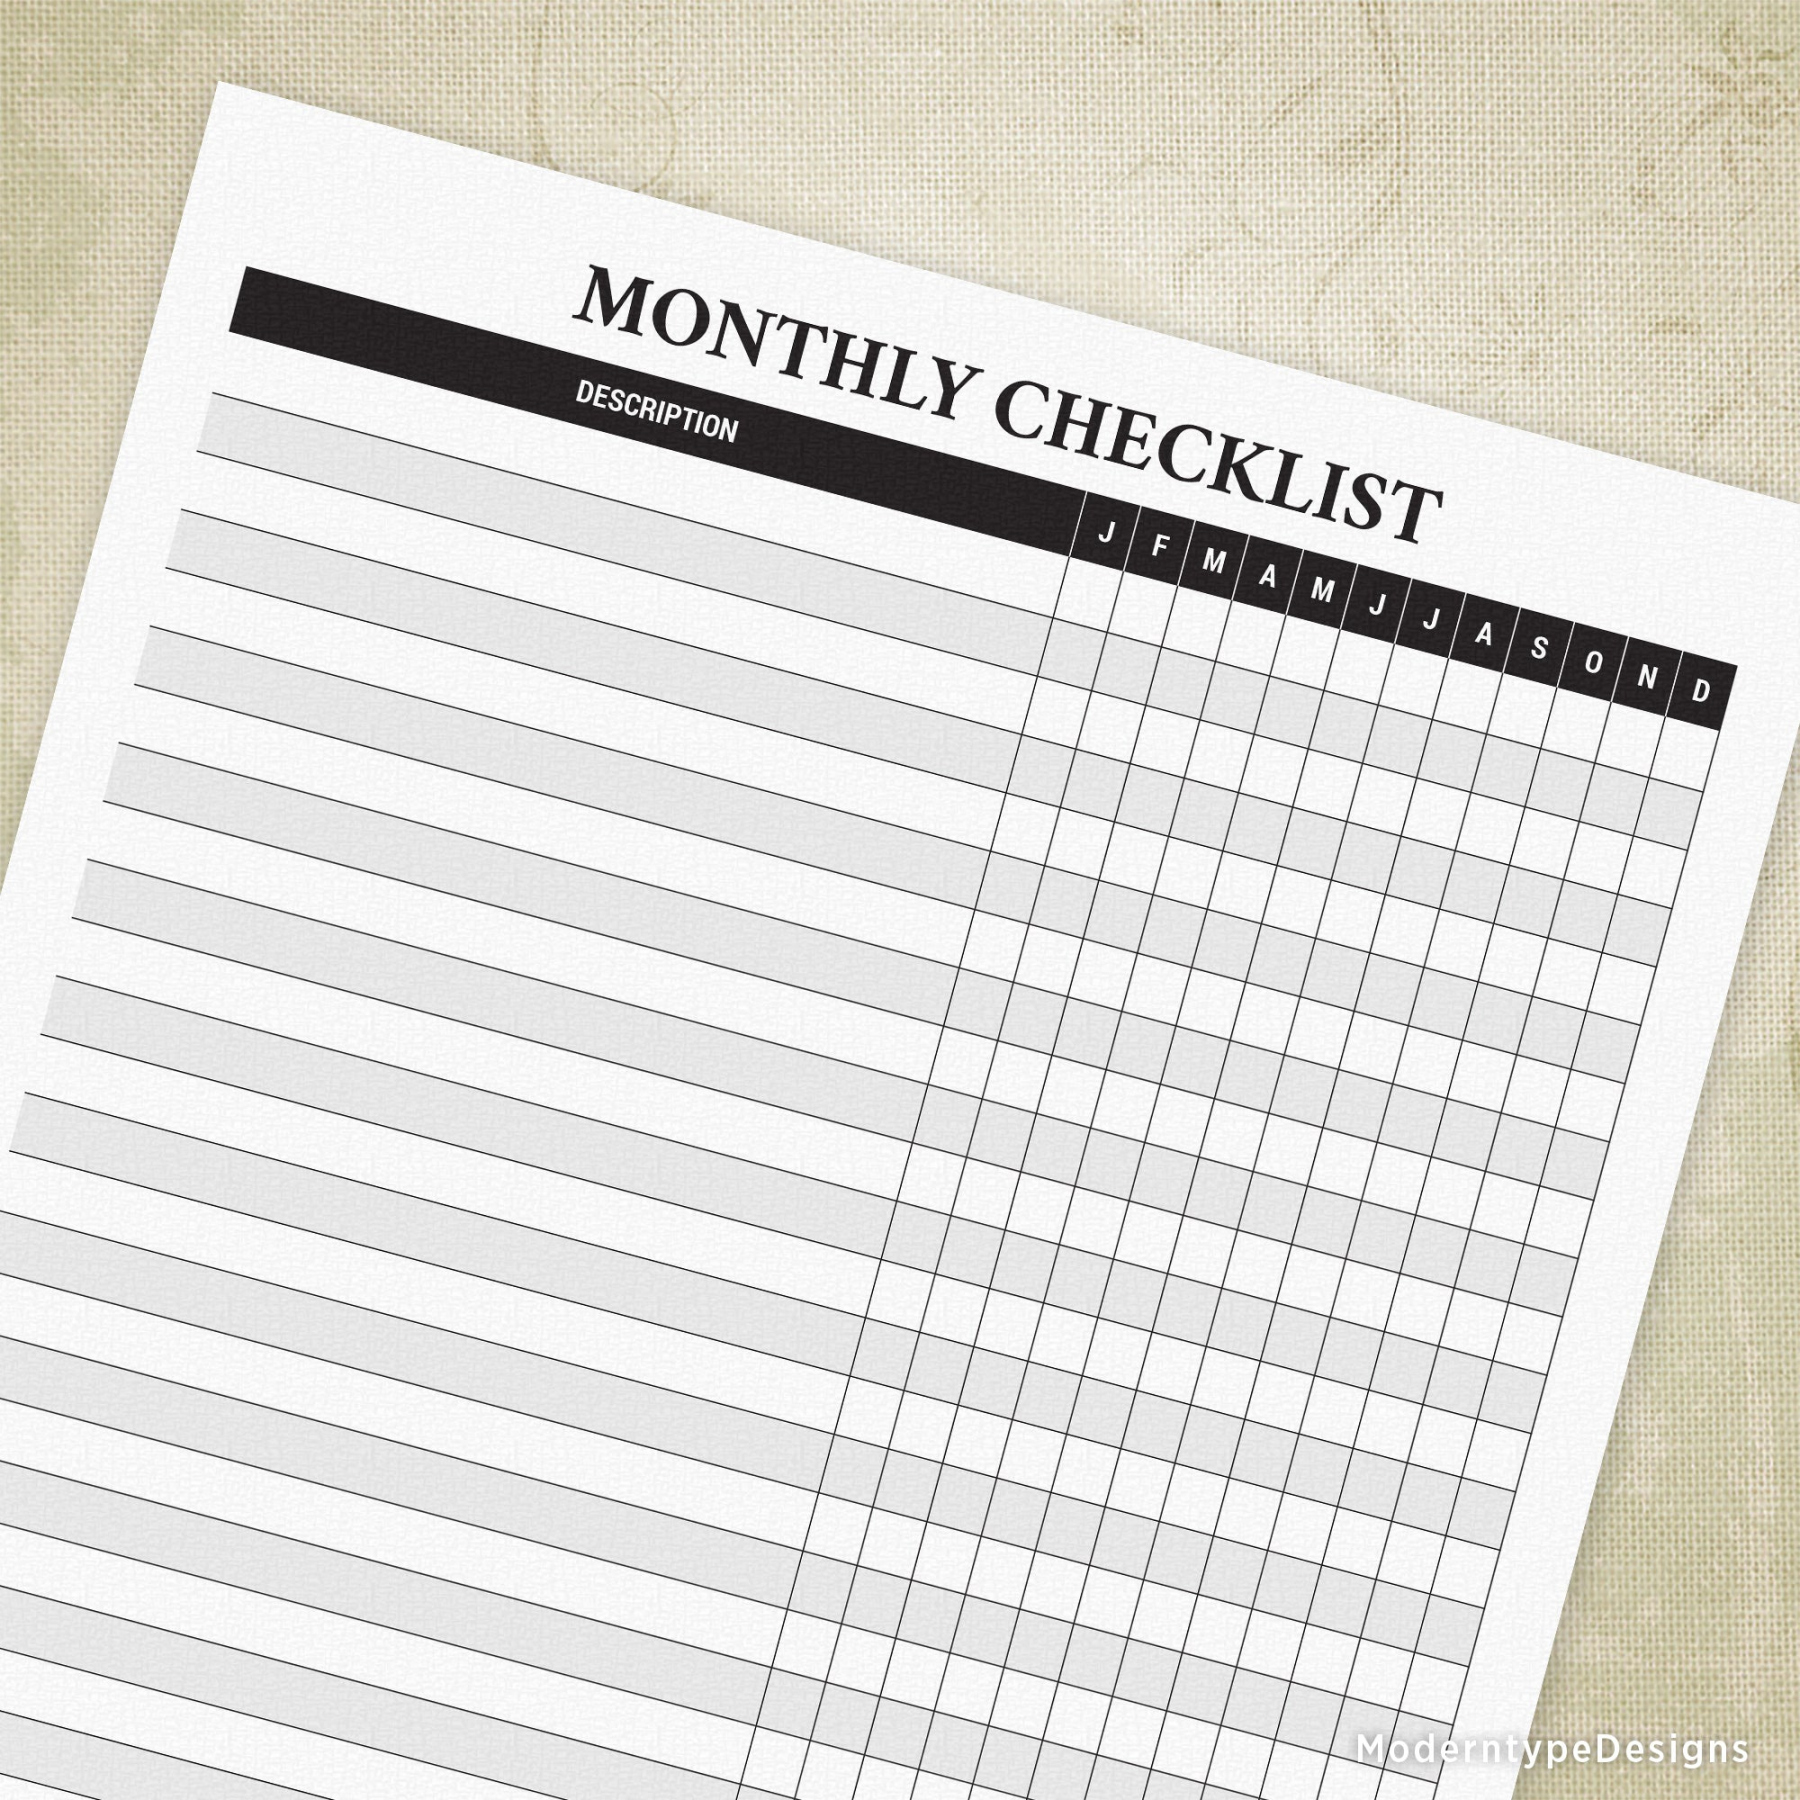 Monthly Checklist Printable - FREE Printables - Monthly Checklist